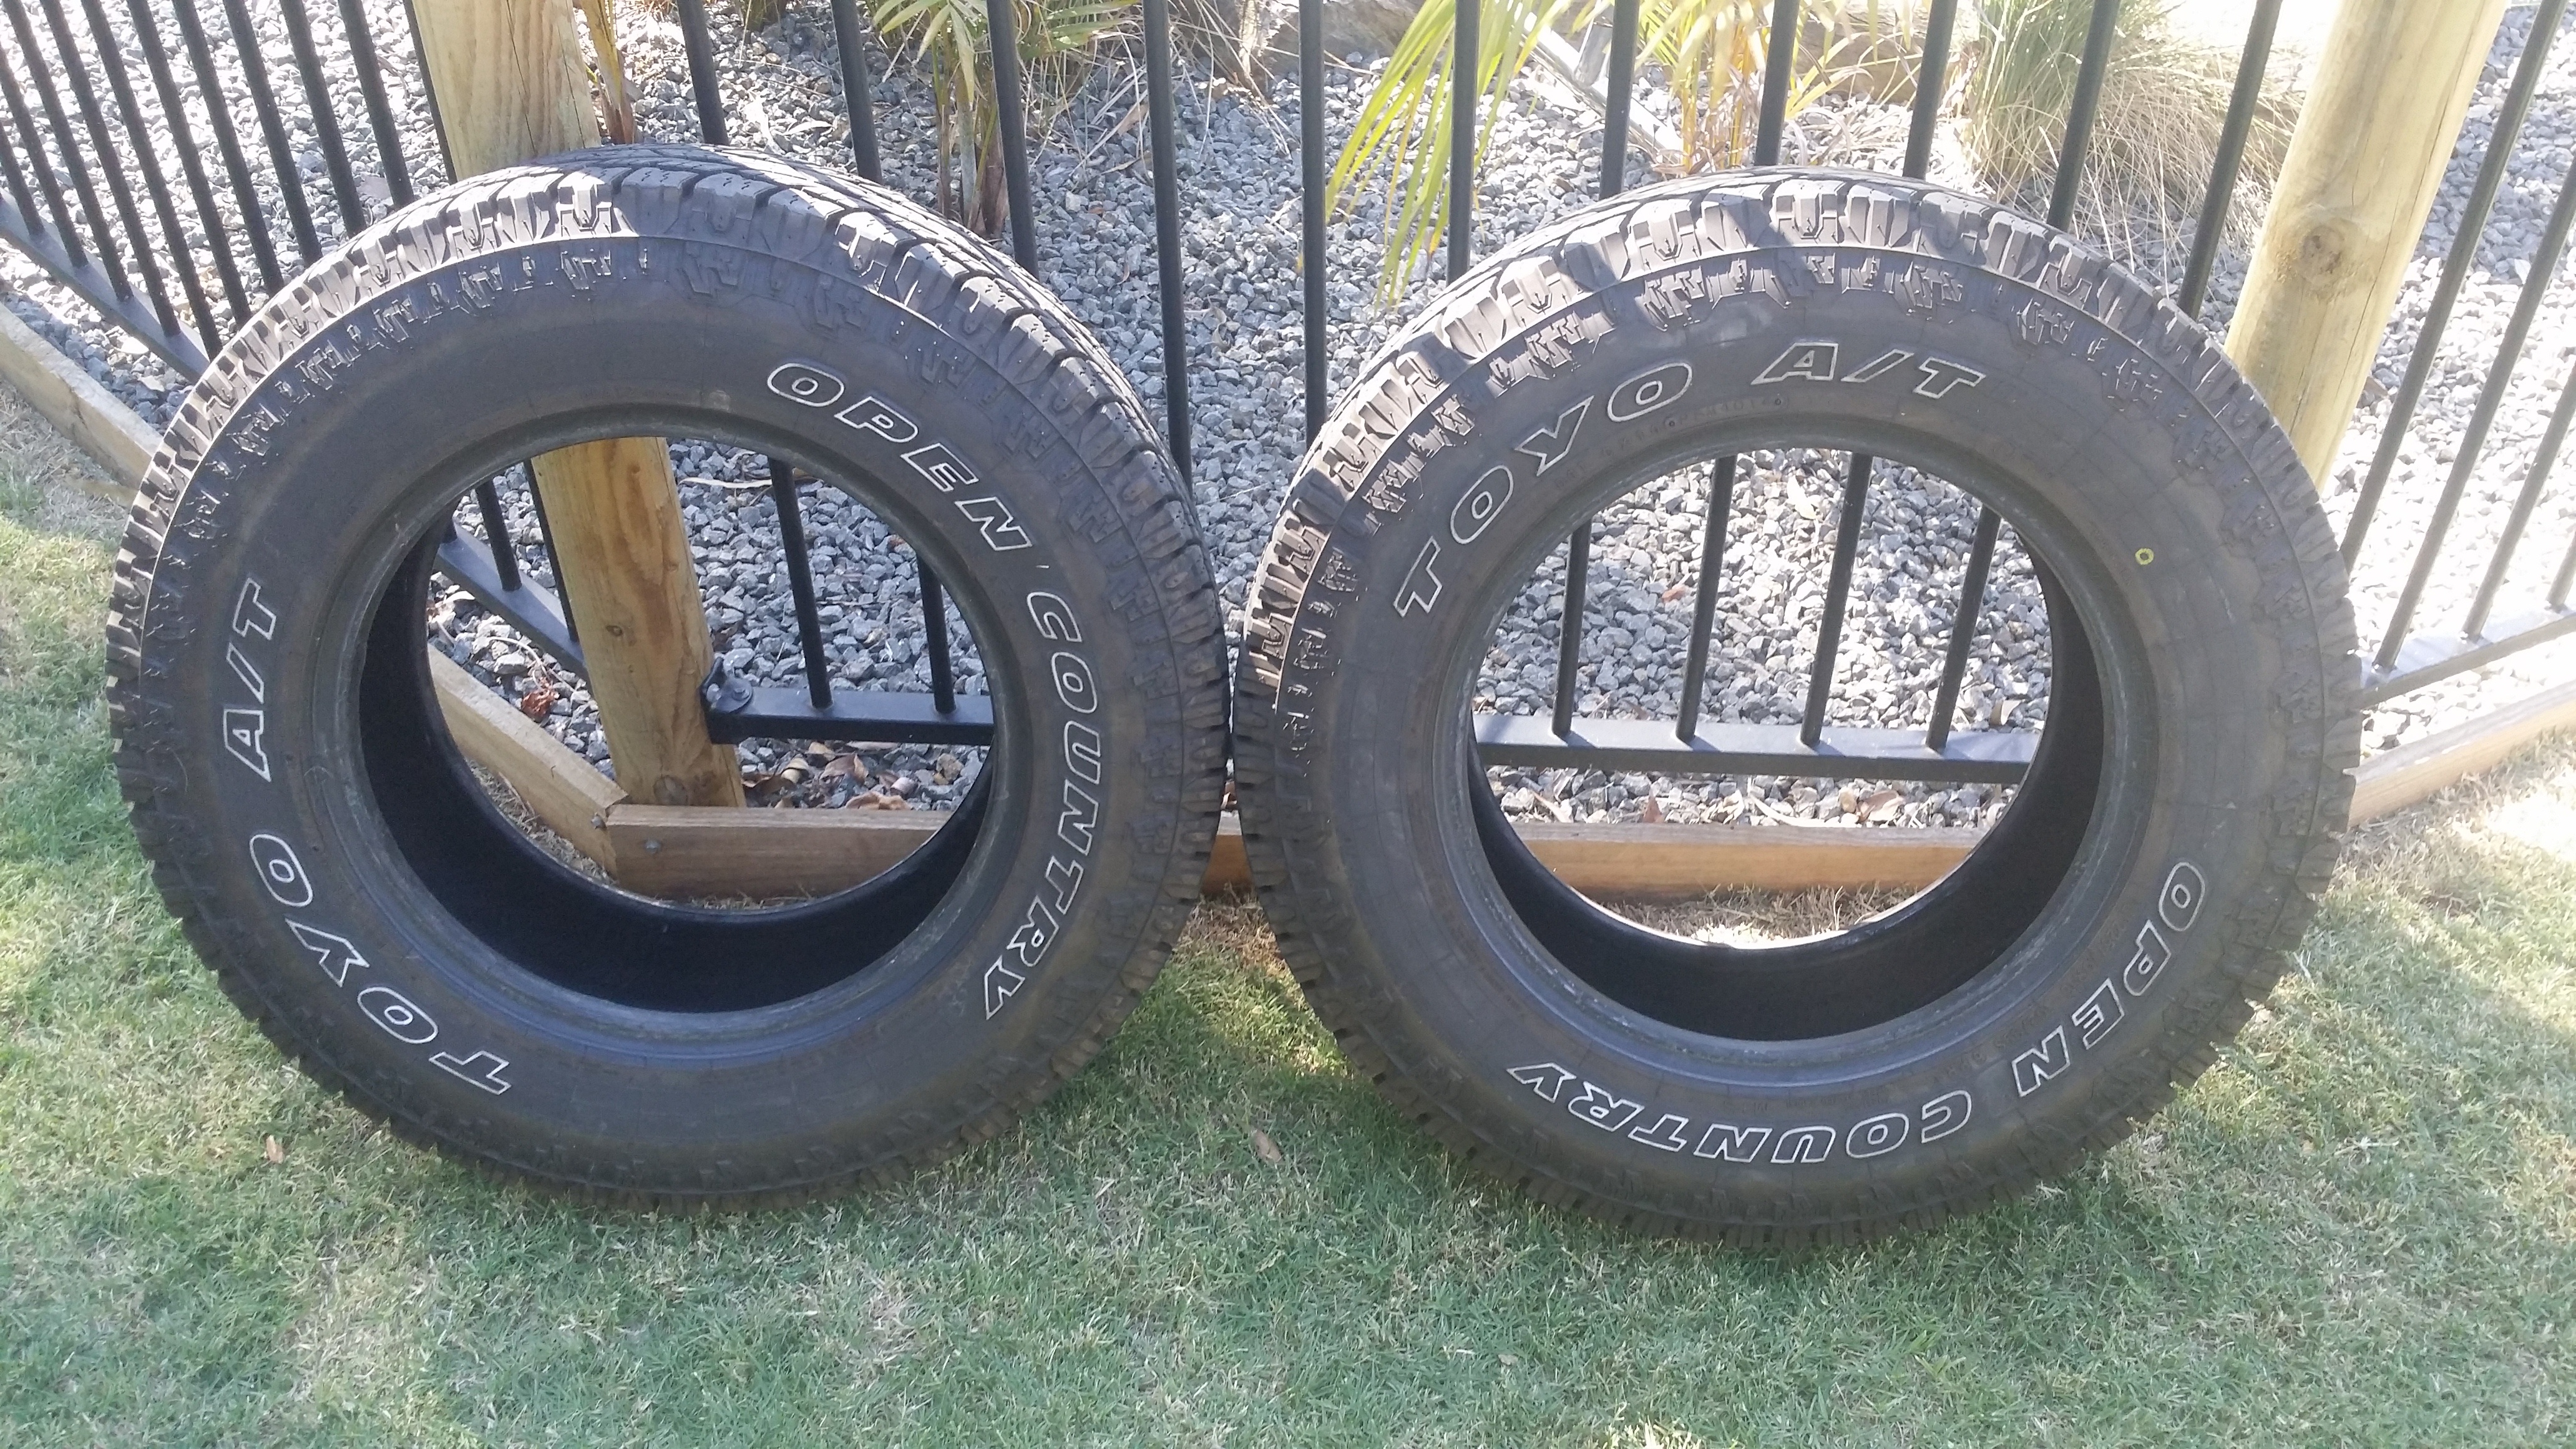 TOYO Open Country A/T II 95% Tread. SET of 4. 225/70/16